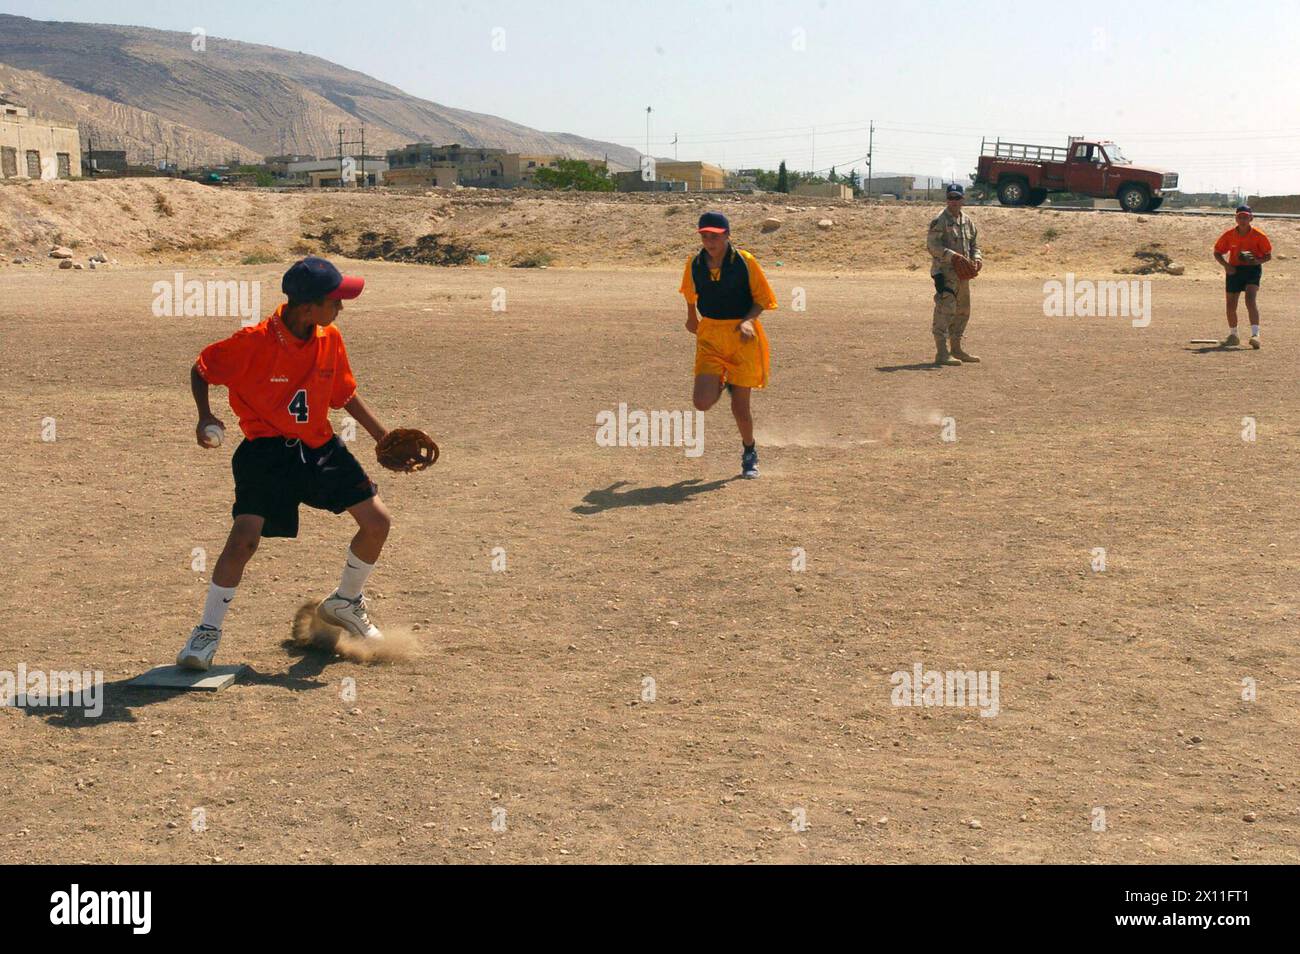 An Iraqi youth catches a ball at second base to make the first out of the day during a baseball game with Soldiers from the 416th Civil Affairs Battalion, an Army Reserve unit from Norristown, Pa.  The 416th Soldiers are teaching children from Al Kush, Iraq, a village approximately 50 km from Mosul, to play the game of baseball ca. July 29, 2004 Stock Photo